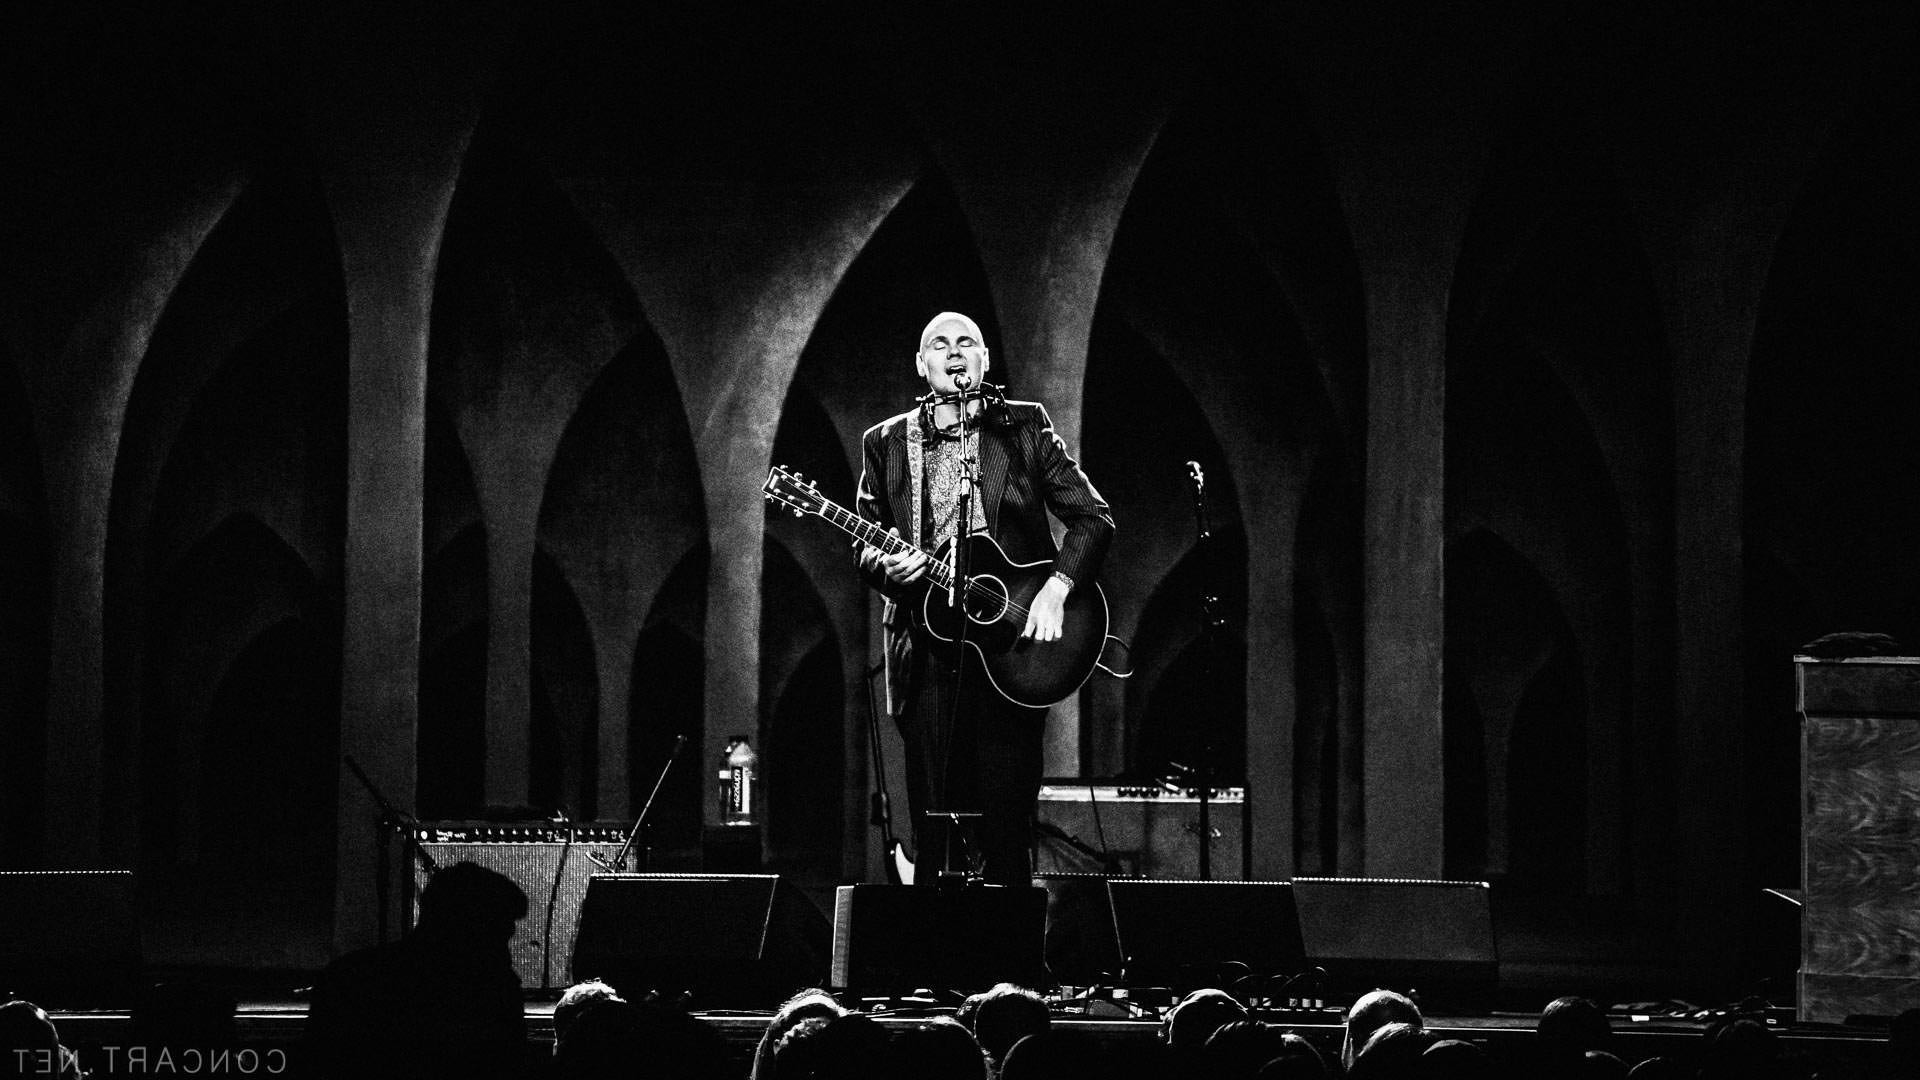 men, Singer, Musicians, Billy Corgan, Crowds, Smashing Pumpkins, Guitar, Concerts, Concert Hall, Indianapolis, USA, Monochrome, Stages, Speakers, Arch Wallpaper